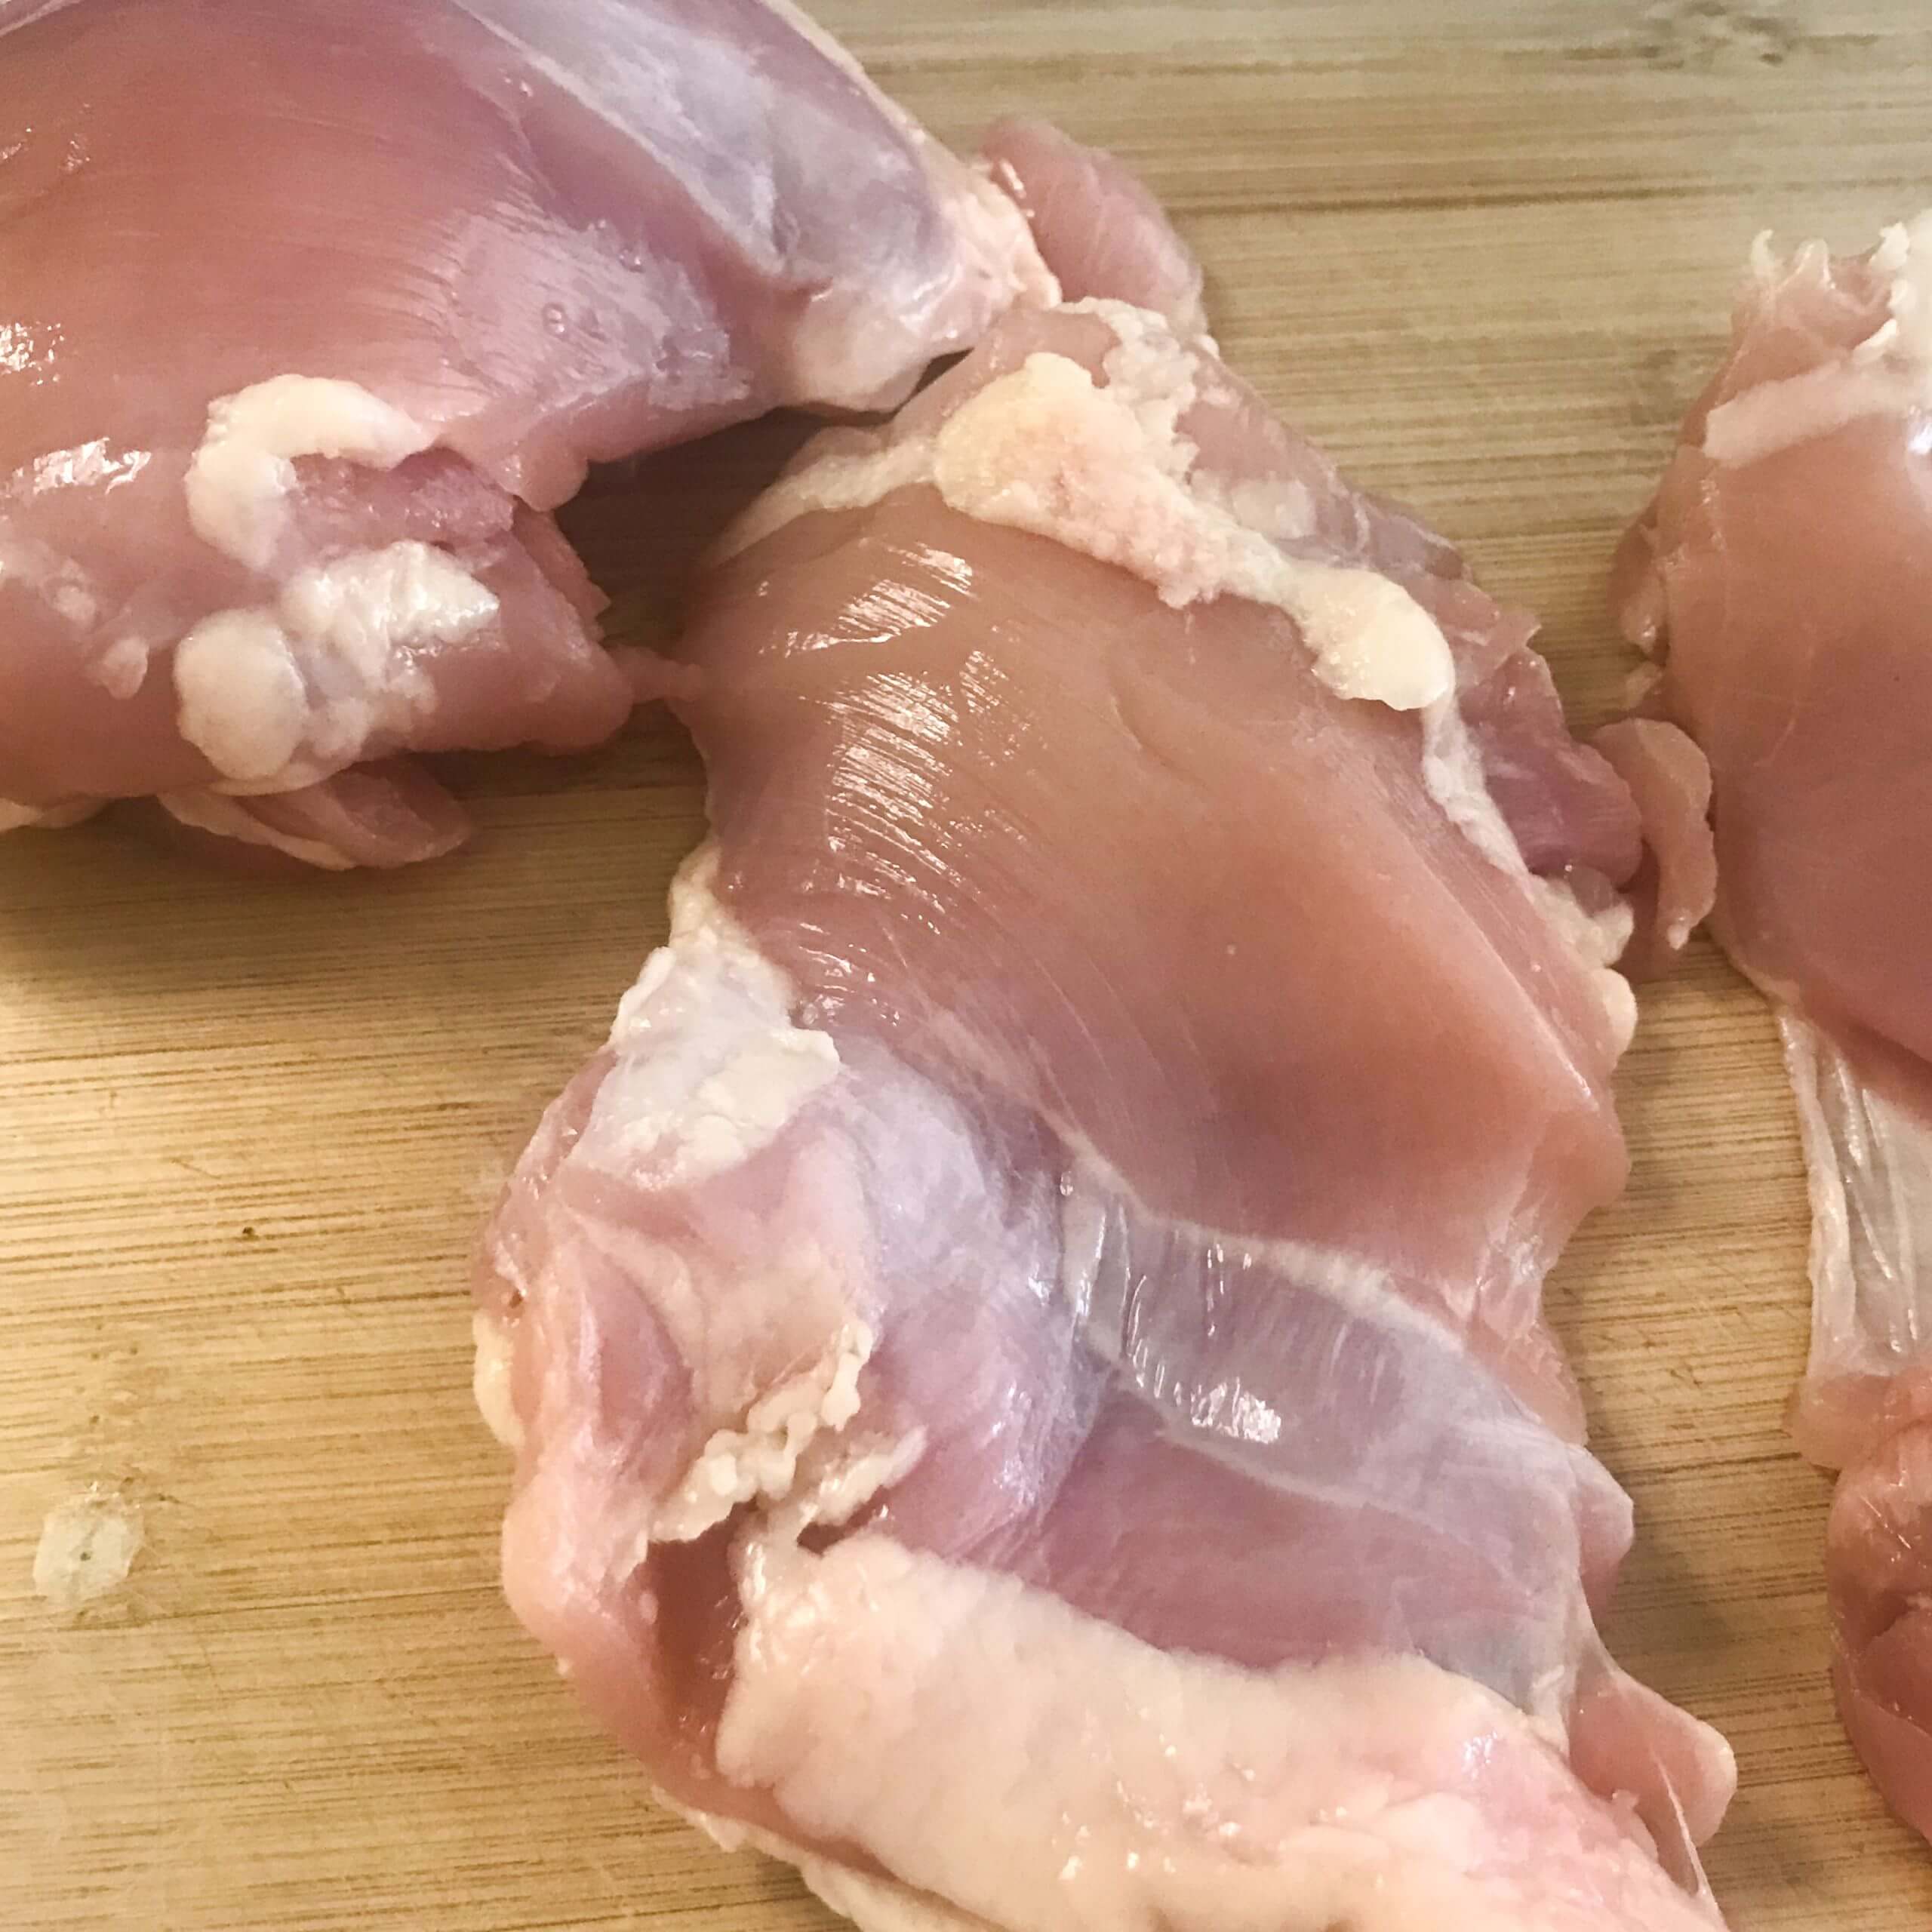 skinned chicken thighs on cutting board